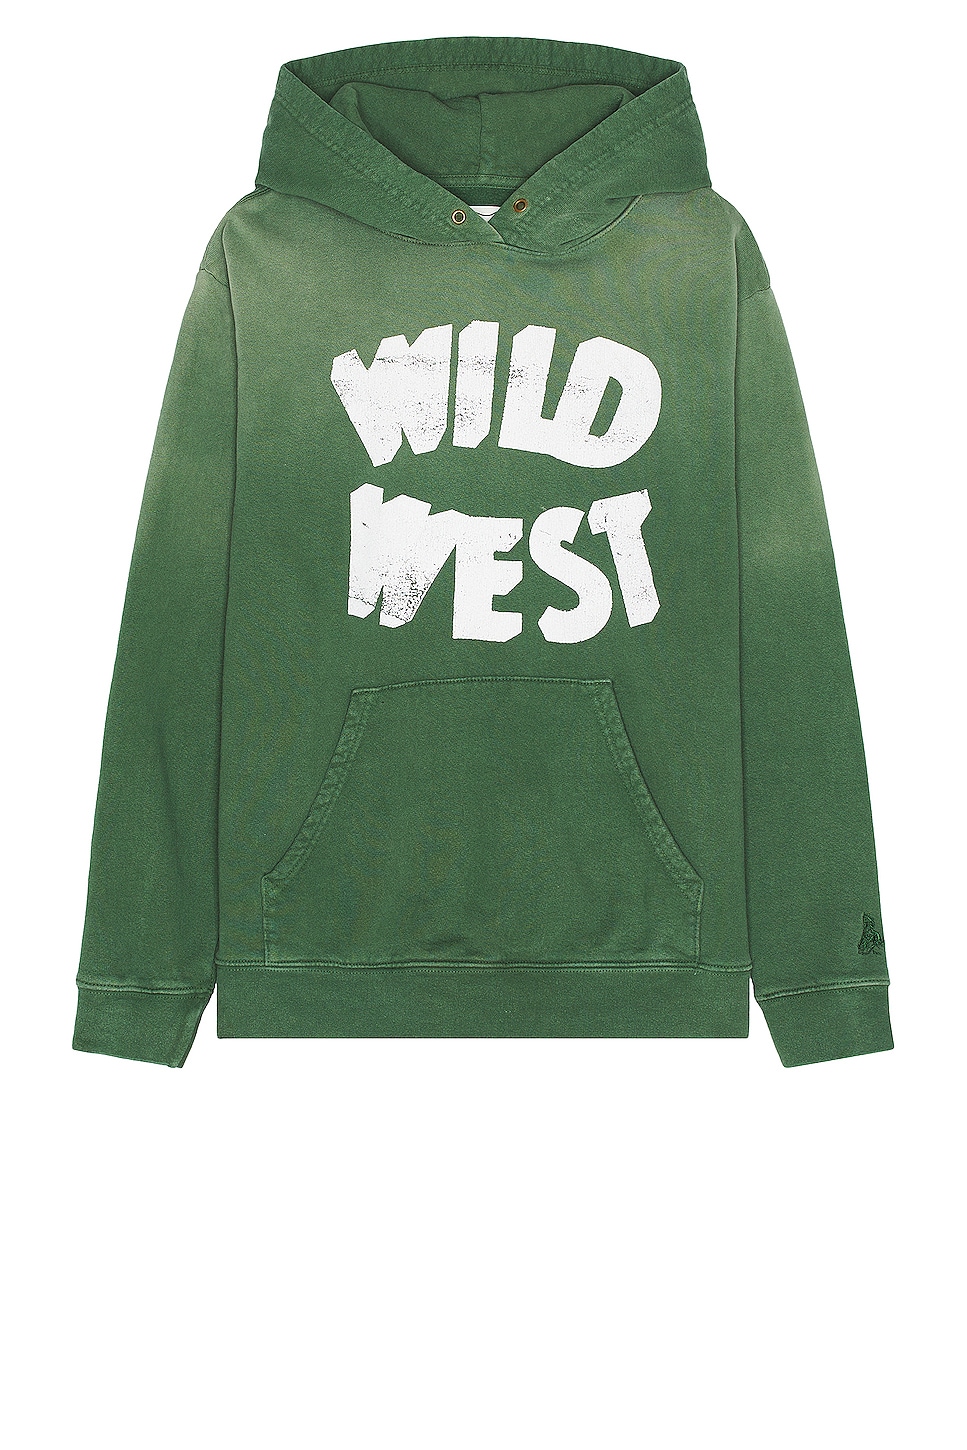 Image 1 of ONE OF THESE DAYS Wild West Hoodie in Olive Green